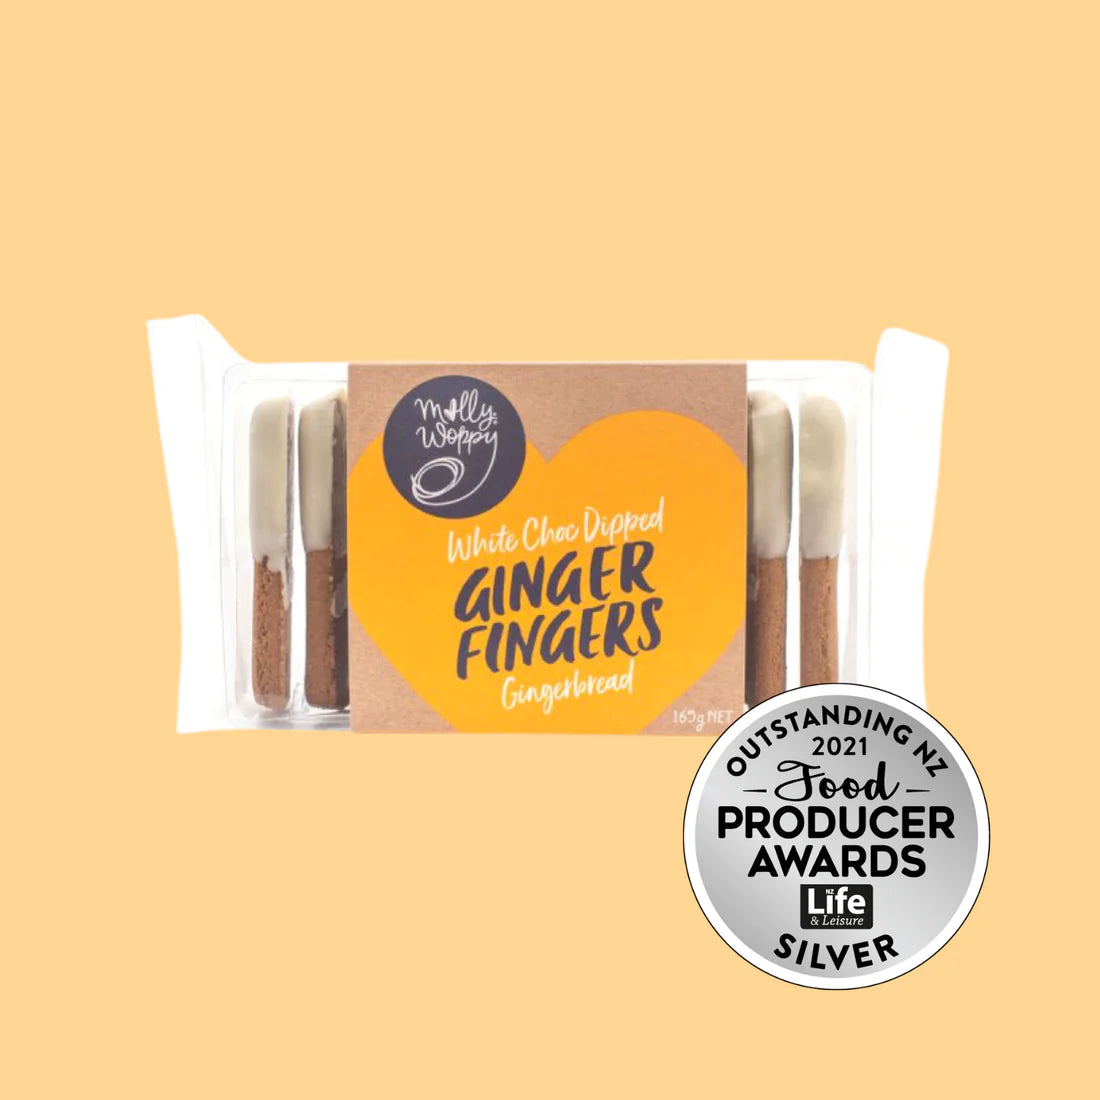 Gingerbread Ginger Fingers White Choc Dipped